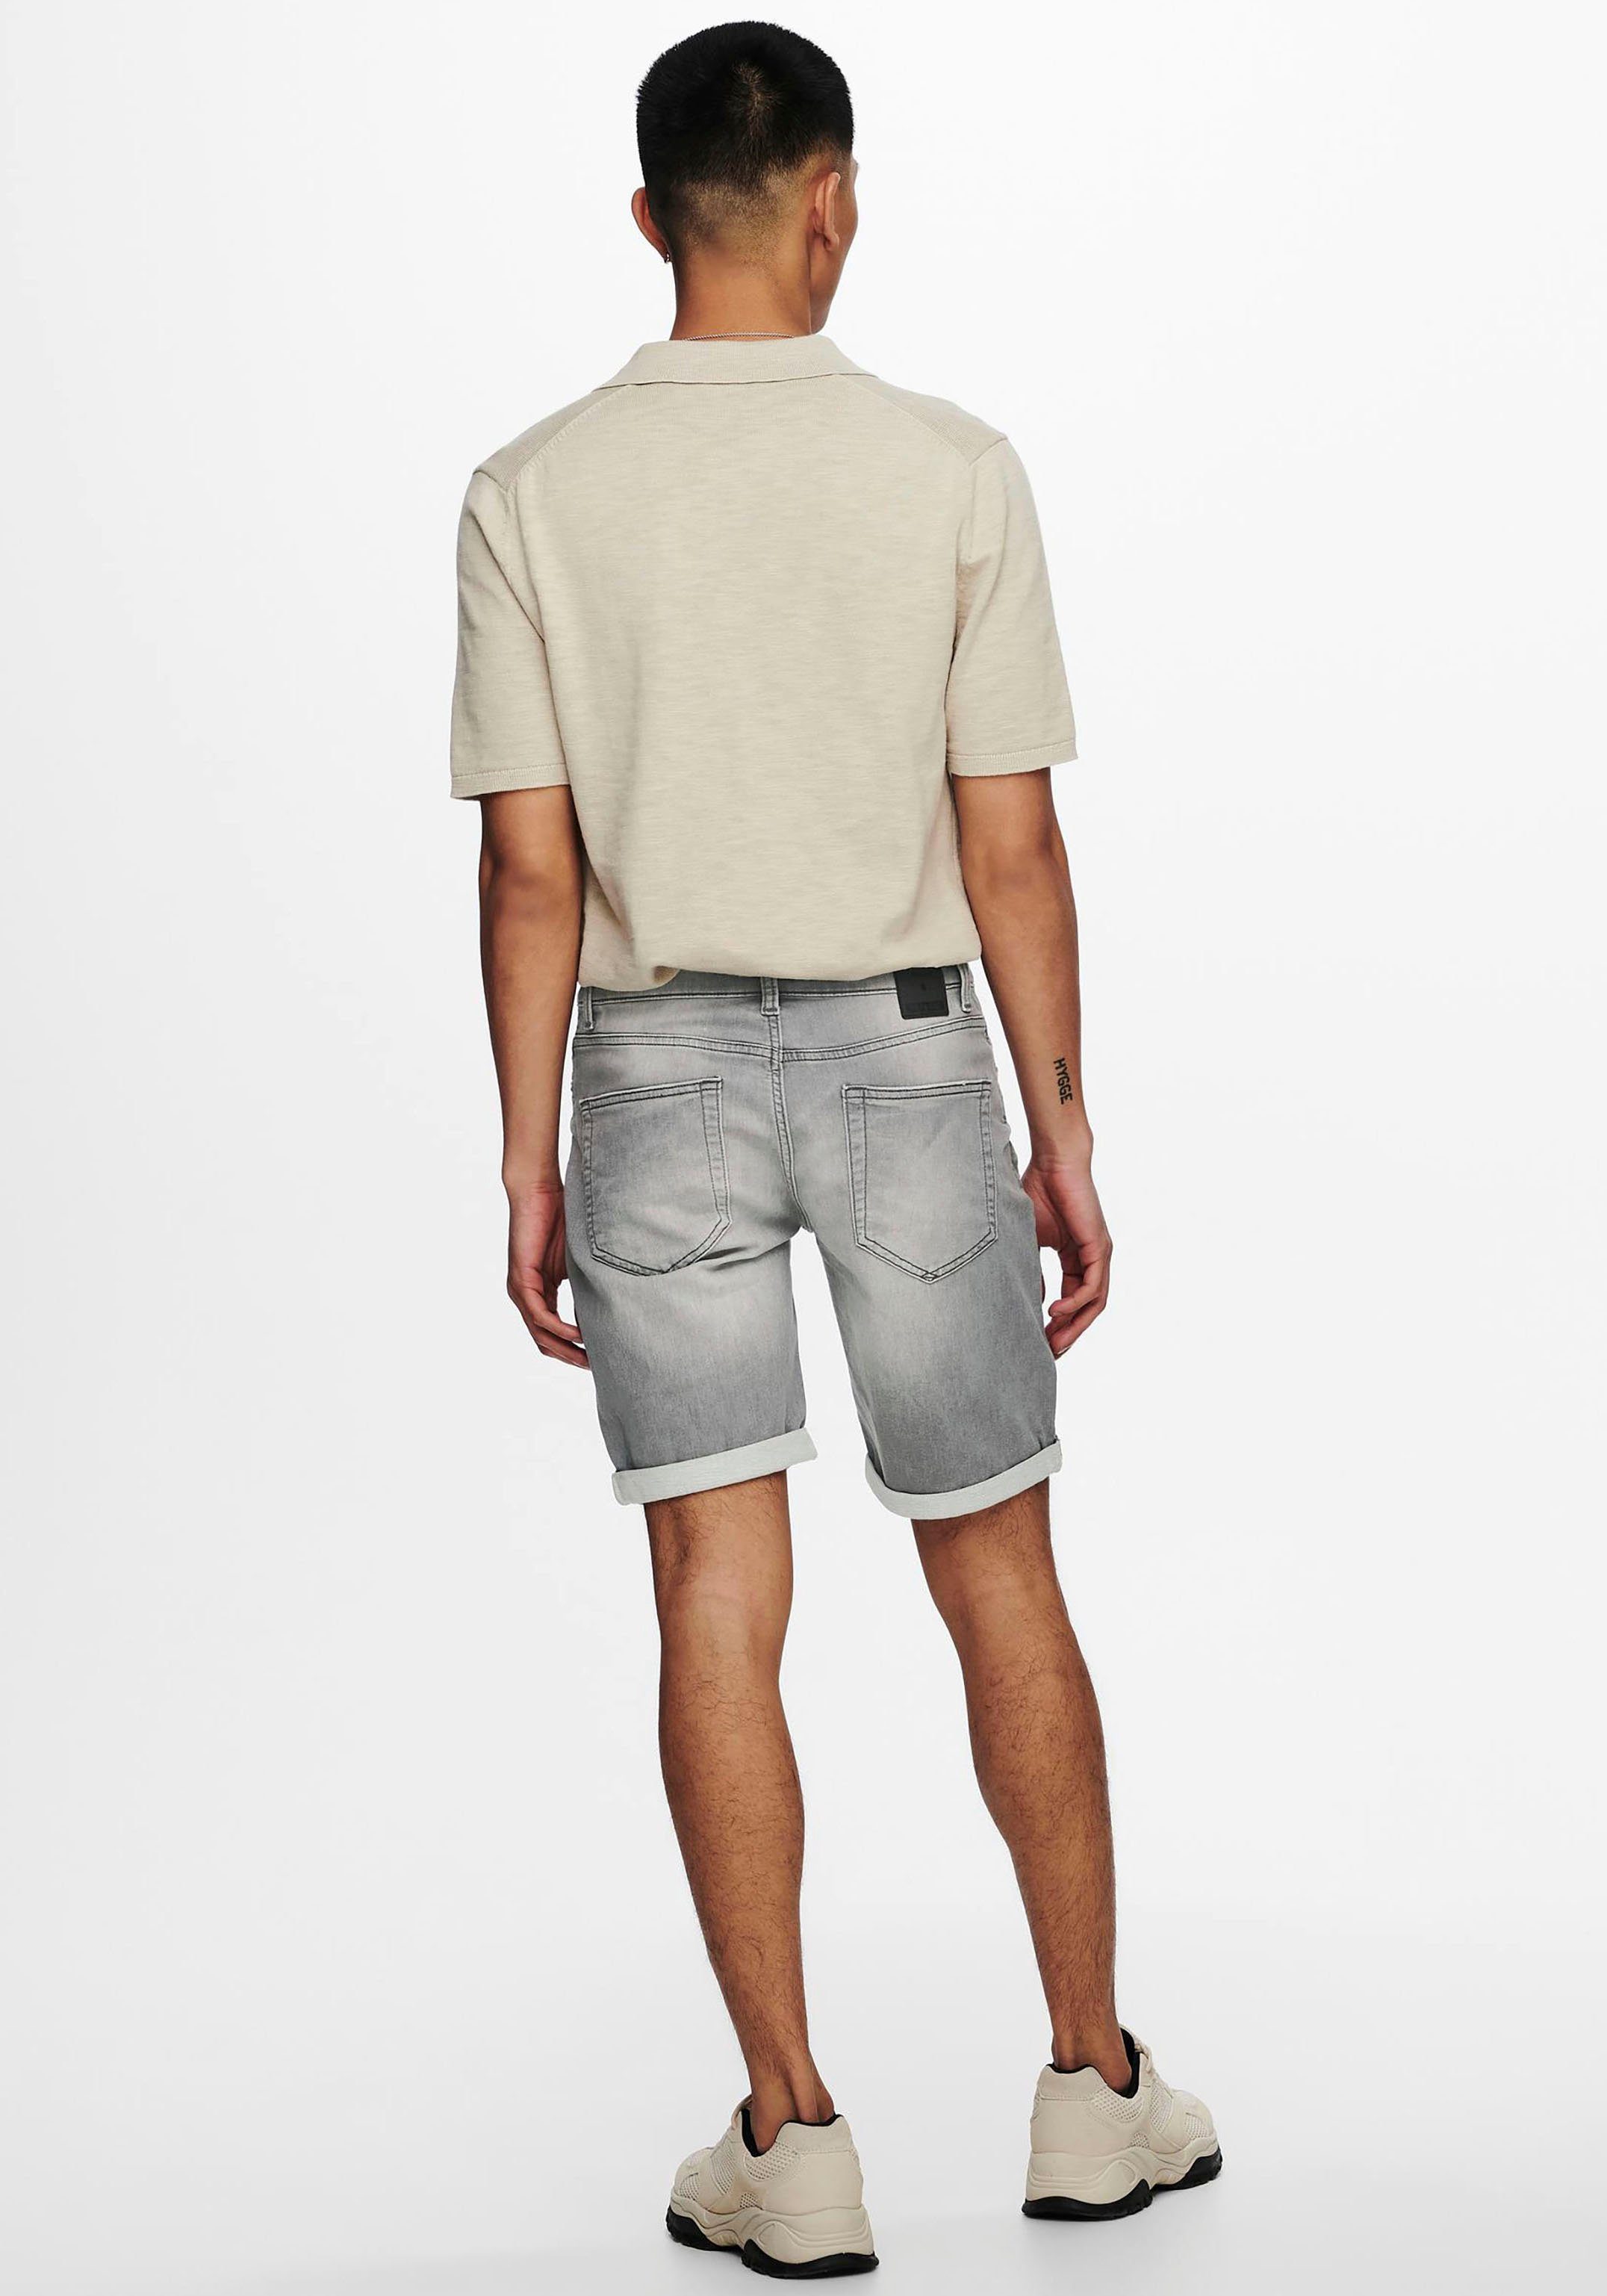 5189 ONSPLY Grey Jeansshorts NOOS ONLY SHORTS Denim LIGHT SONS DNM BLUE &